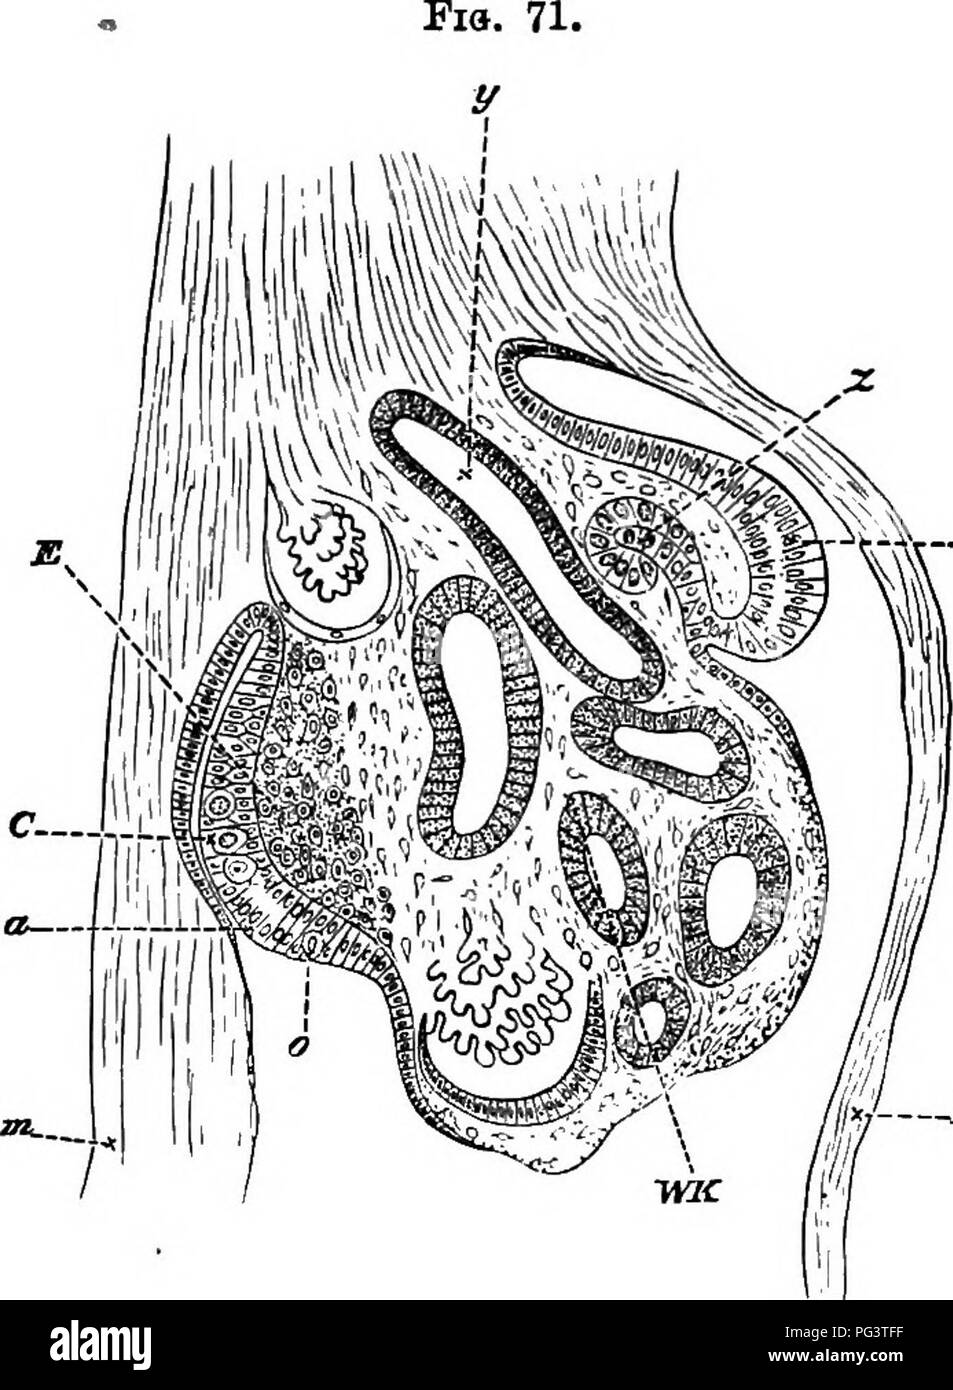 . The elements of embryology . Embryology. VII.J THE MULLERIAN DUCT. 217. Section op the Intermediate Cell-mass on the Fourth Day. (From Waldeyer.) Magnified 160. times. m. mesentery. L. somatopleure. a', portion of the germinal epithelium from which the involution to form the duct of Miiller (0) takes place, a. thickened portion of the germinal epitheUum in which the primitive ova G and 0 are lying. E. modified mesoblast which will form the stroma of the ovary. WK. Wolffian body. y. Wolffian duct. its course its growing point lies m a bay formed by the outer wall of the Wolffian duct, but doe Stock Photo